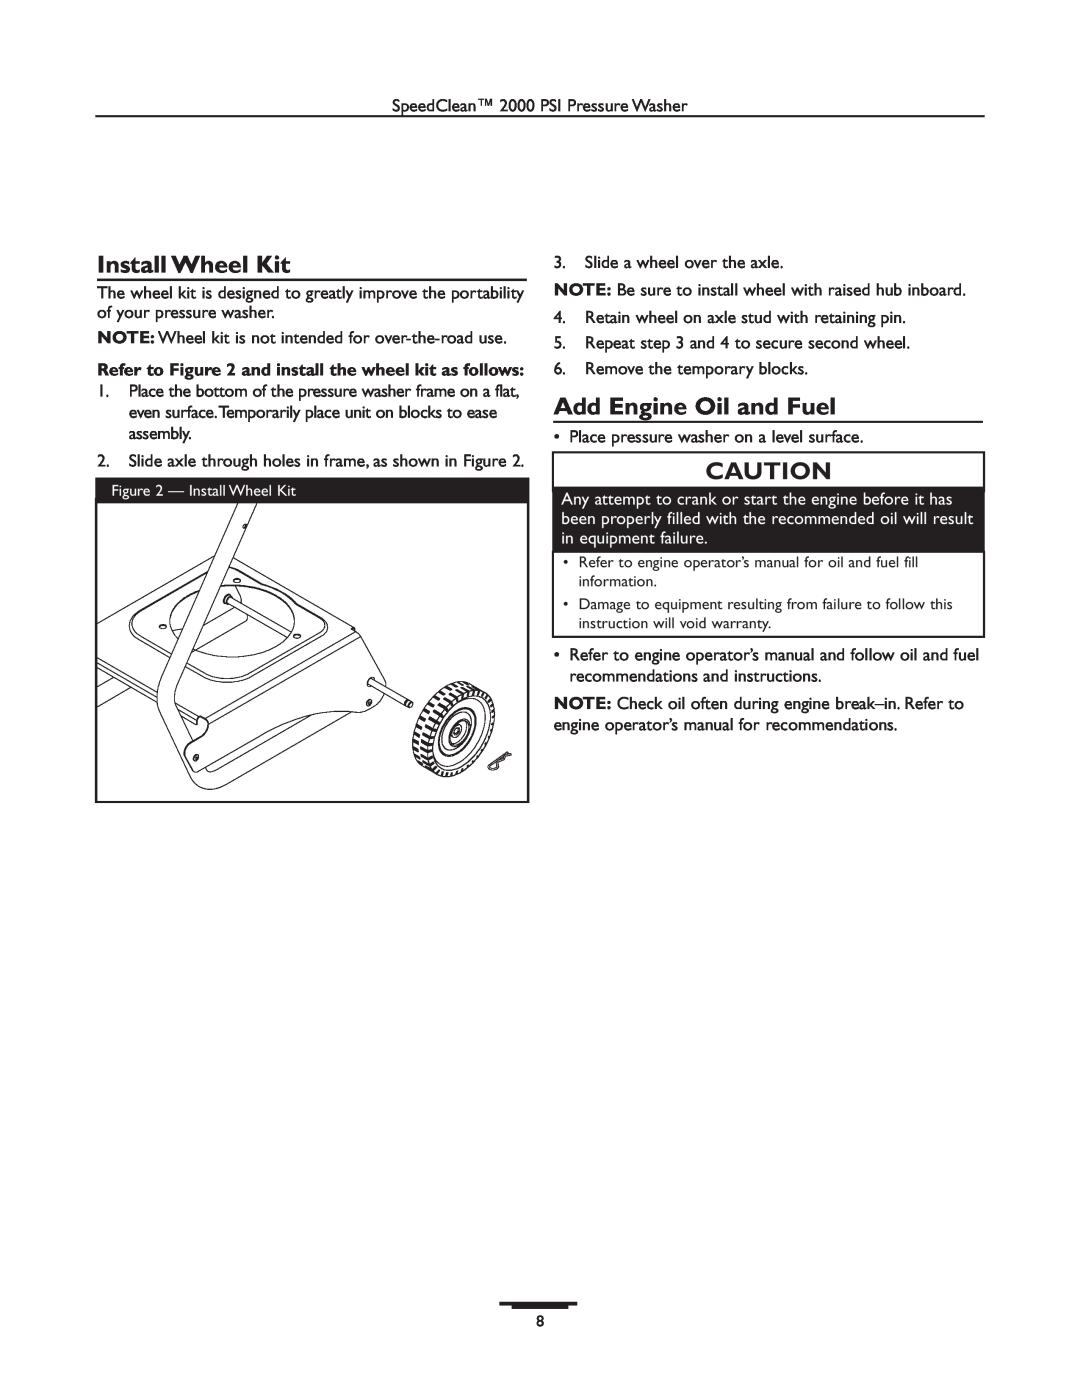 Briggs & Stratton 020238-0 operating instructions Install Wheel Kit, Add Engine Oil and Fuel 